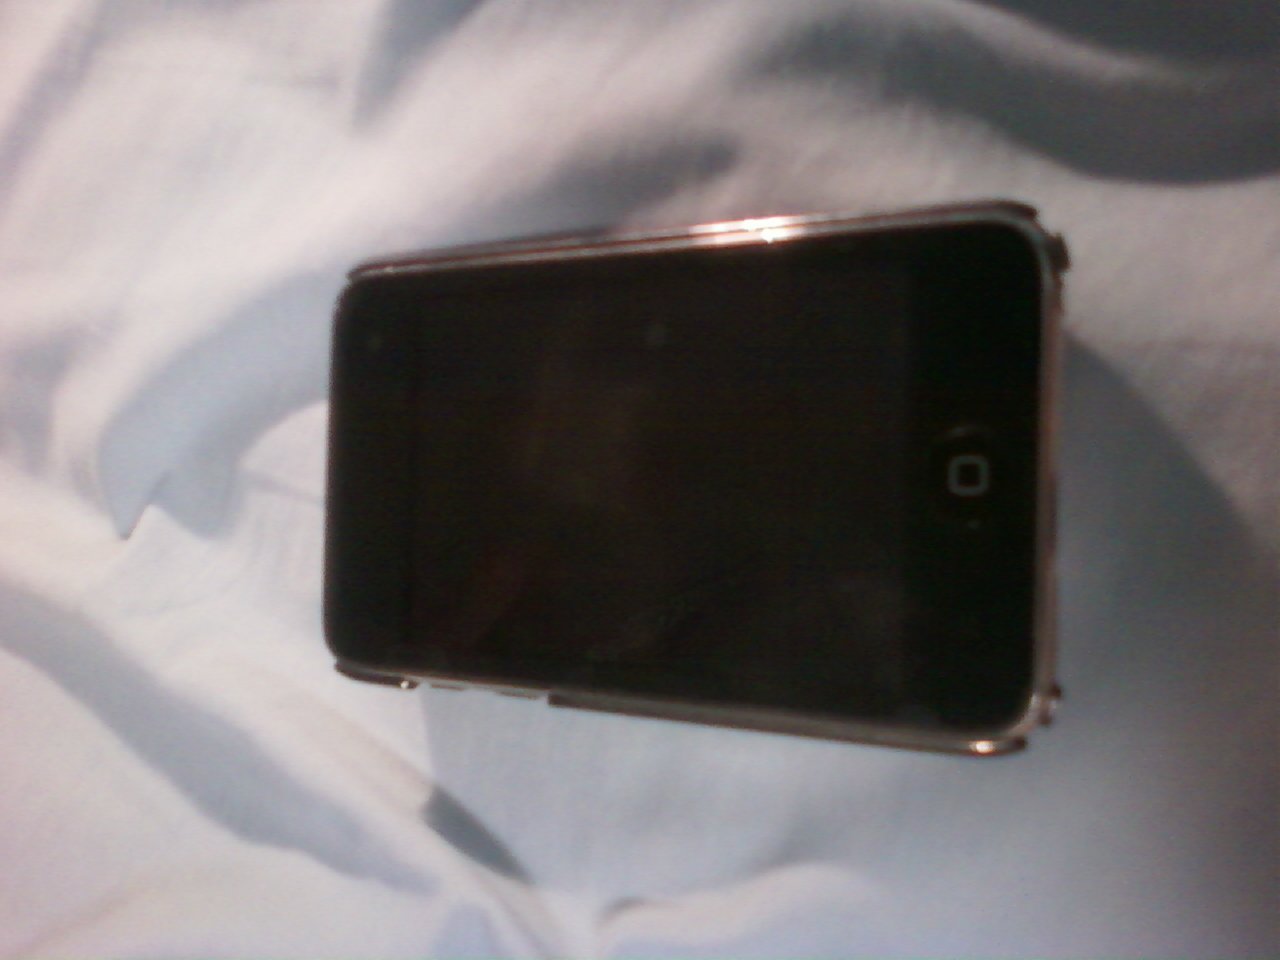 64gb 3rd generation iPod Touch